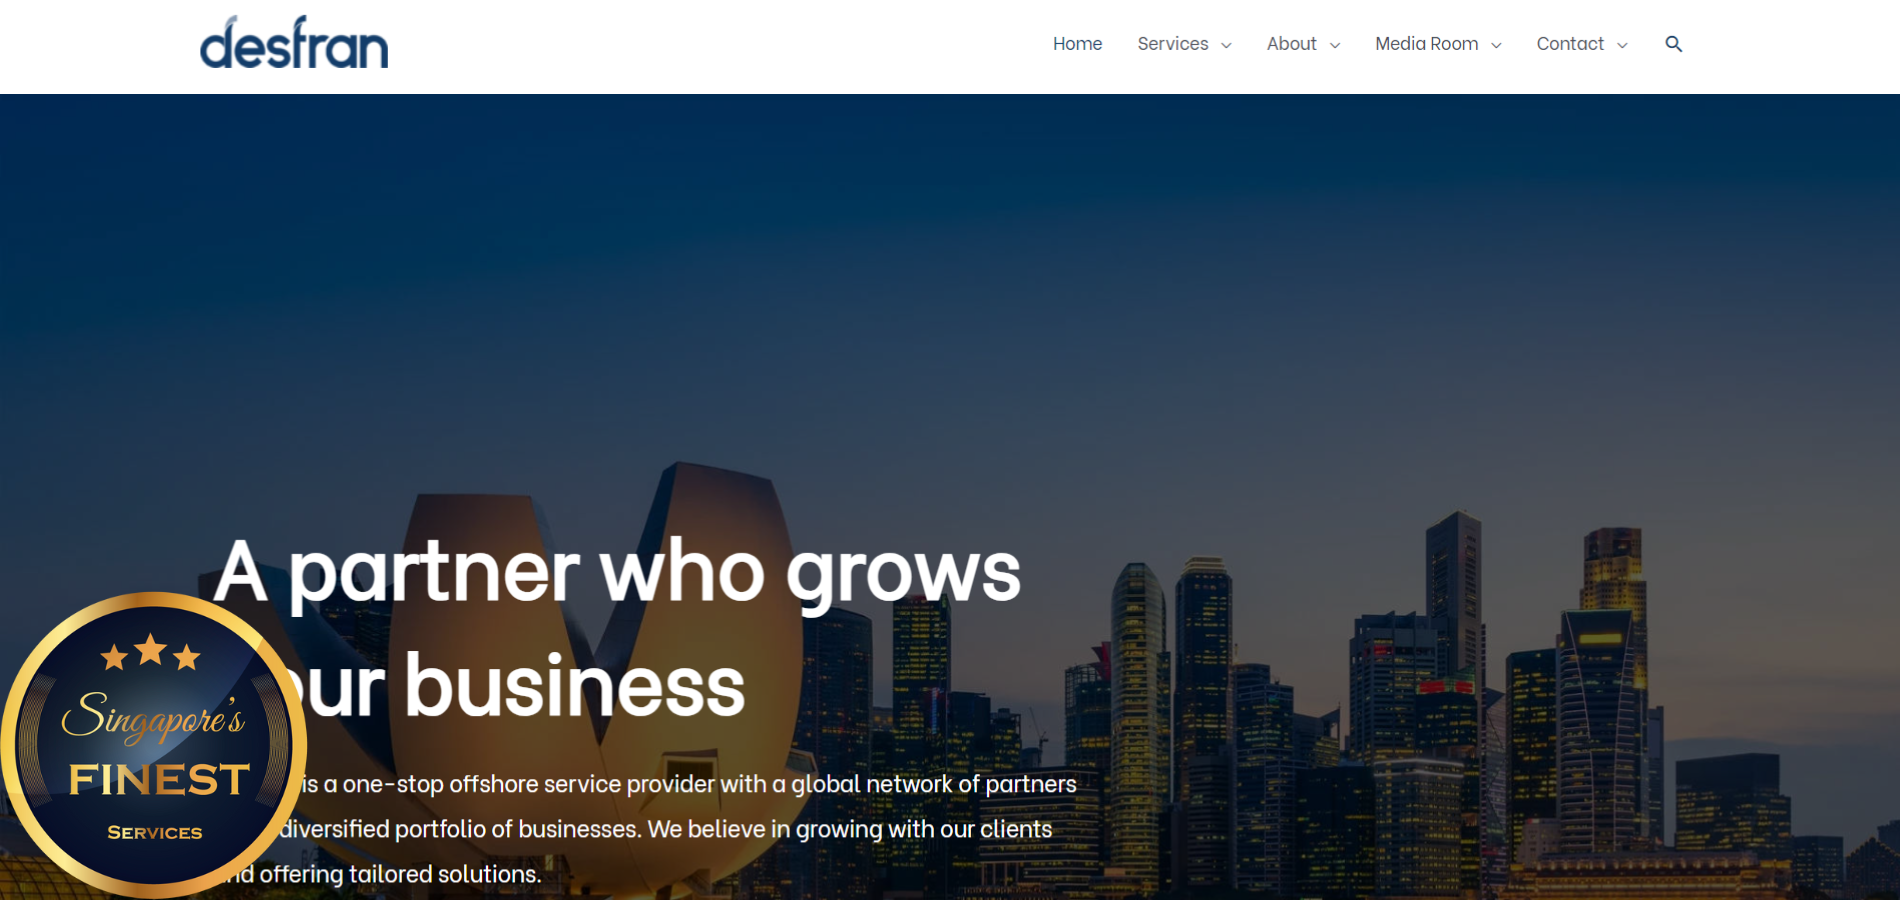 The Finest Business Brokers in Singapore